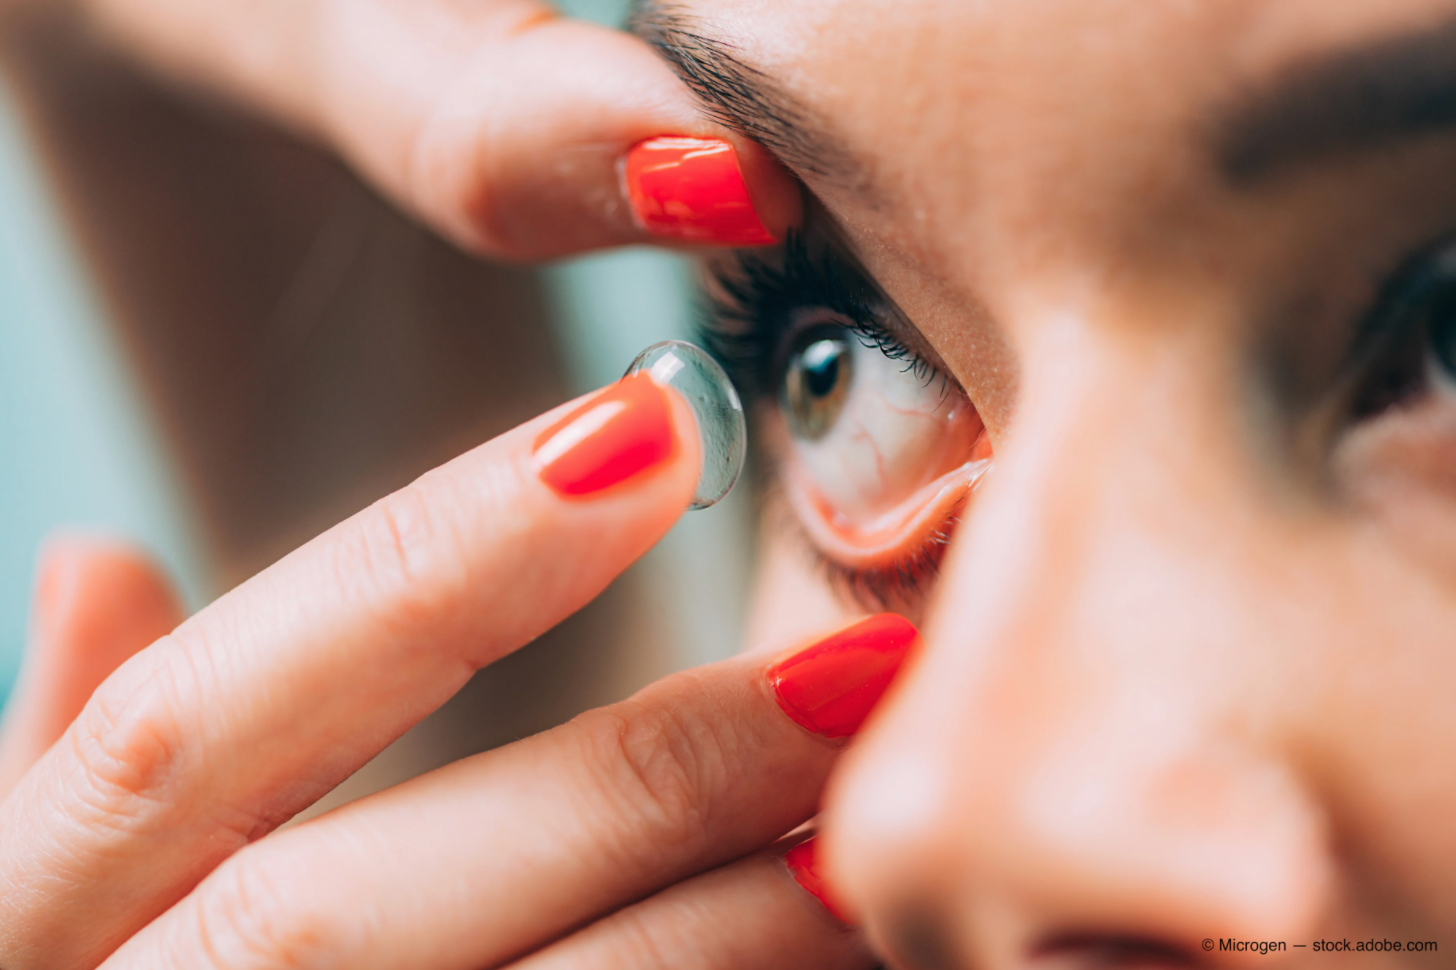 Patients aren’t hearing contact lens care information